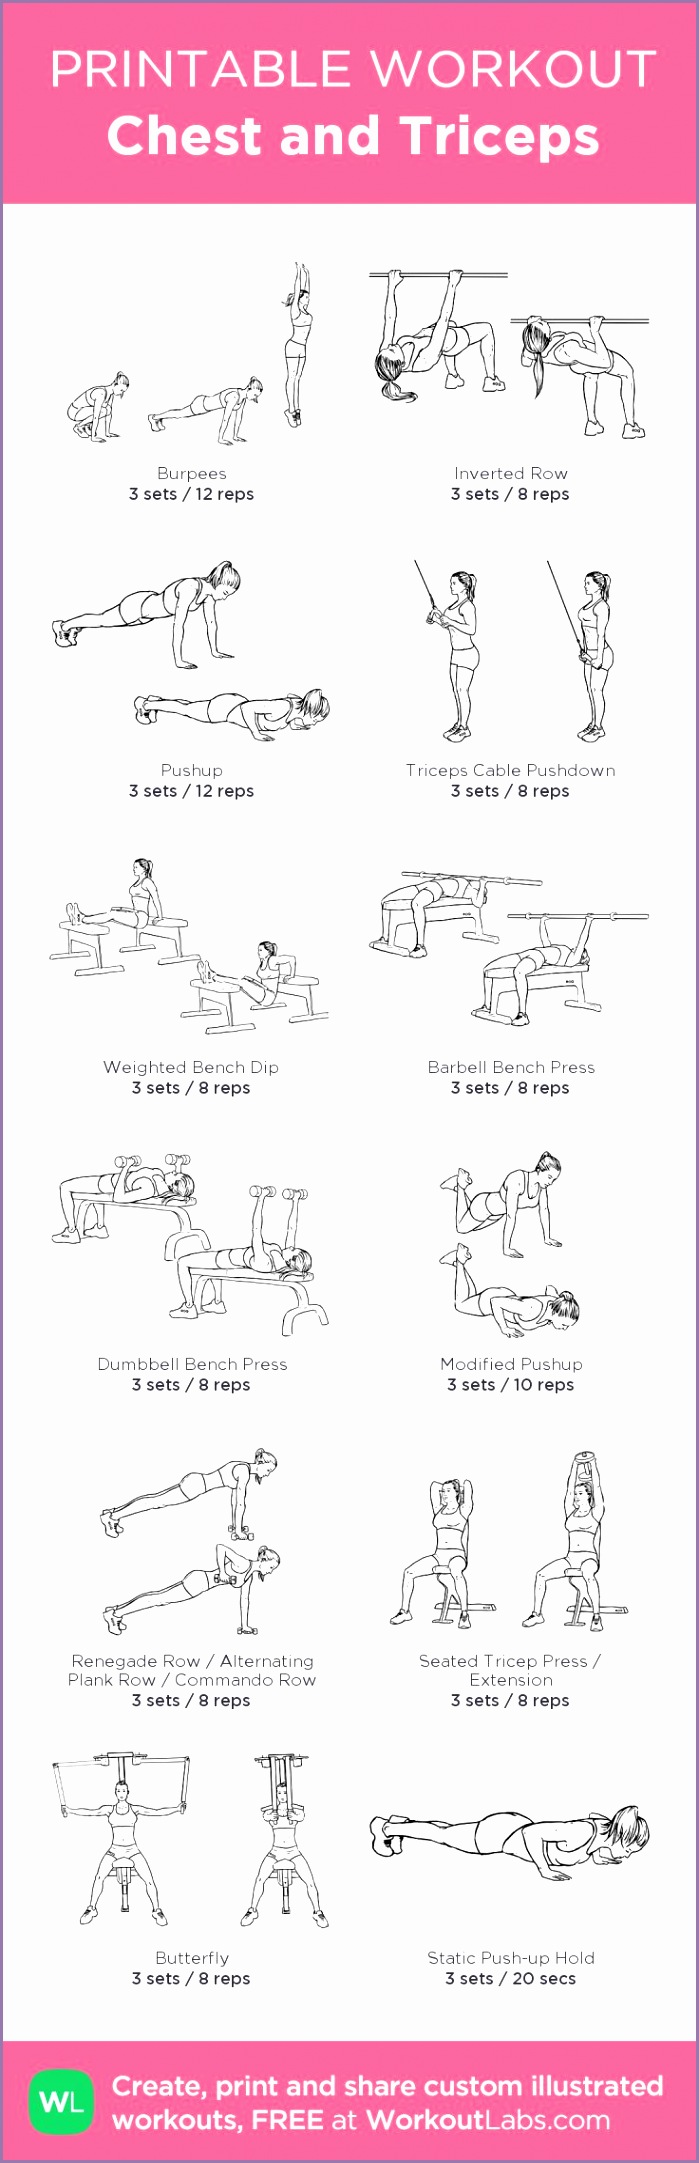 chest and tricep workout